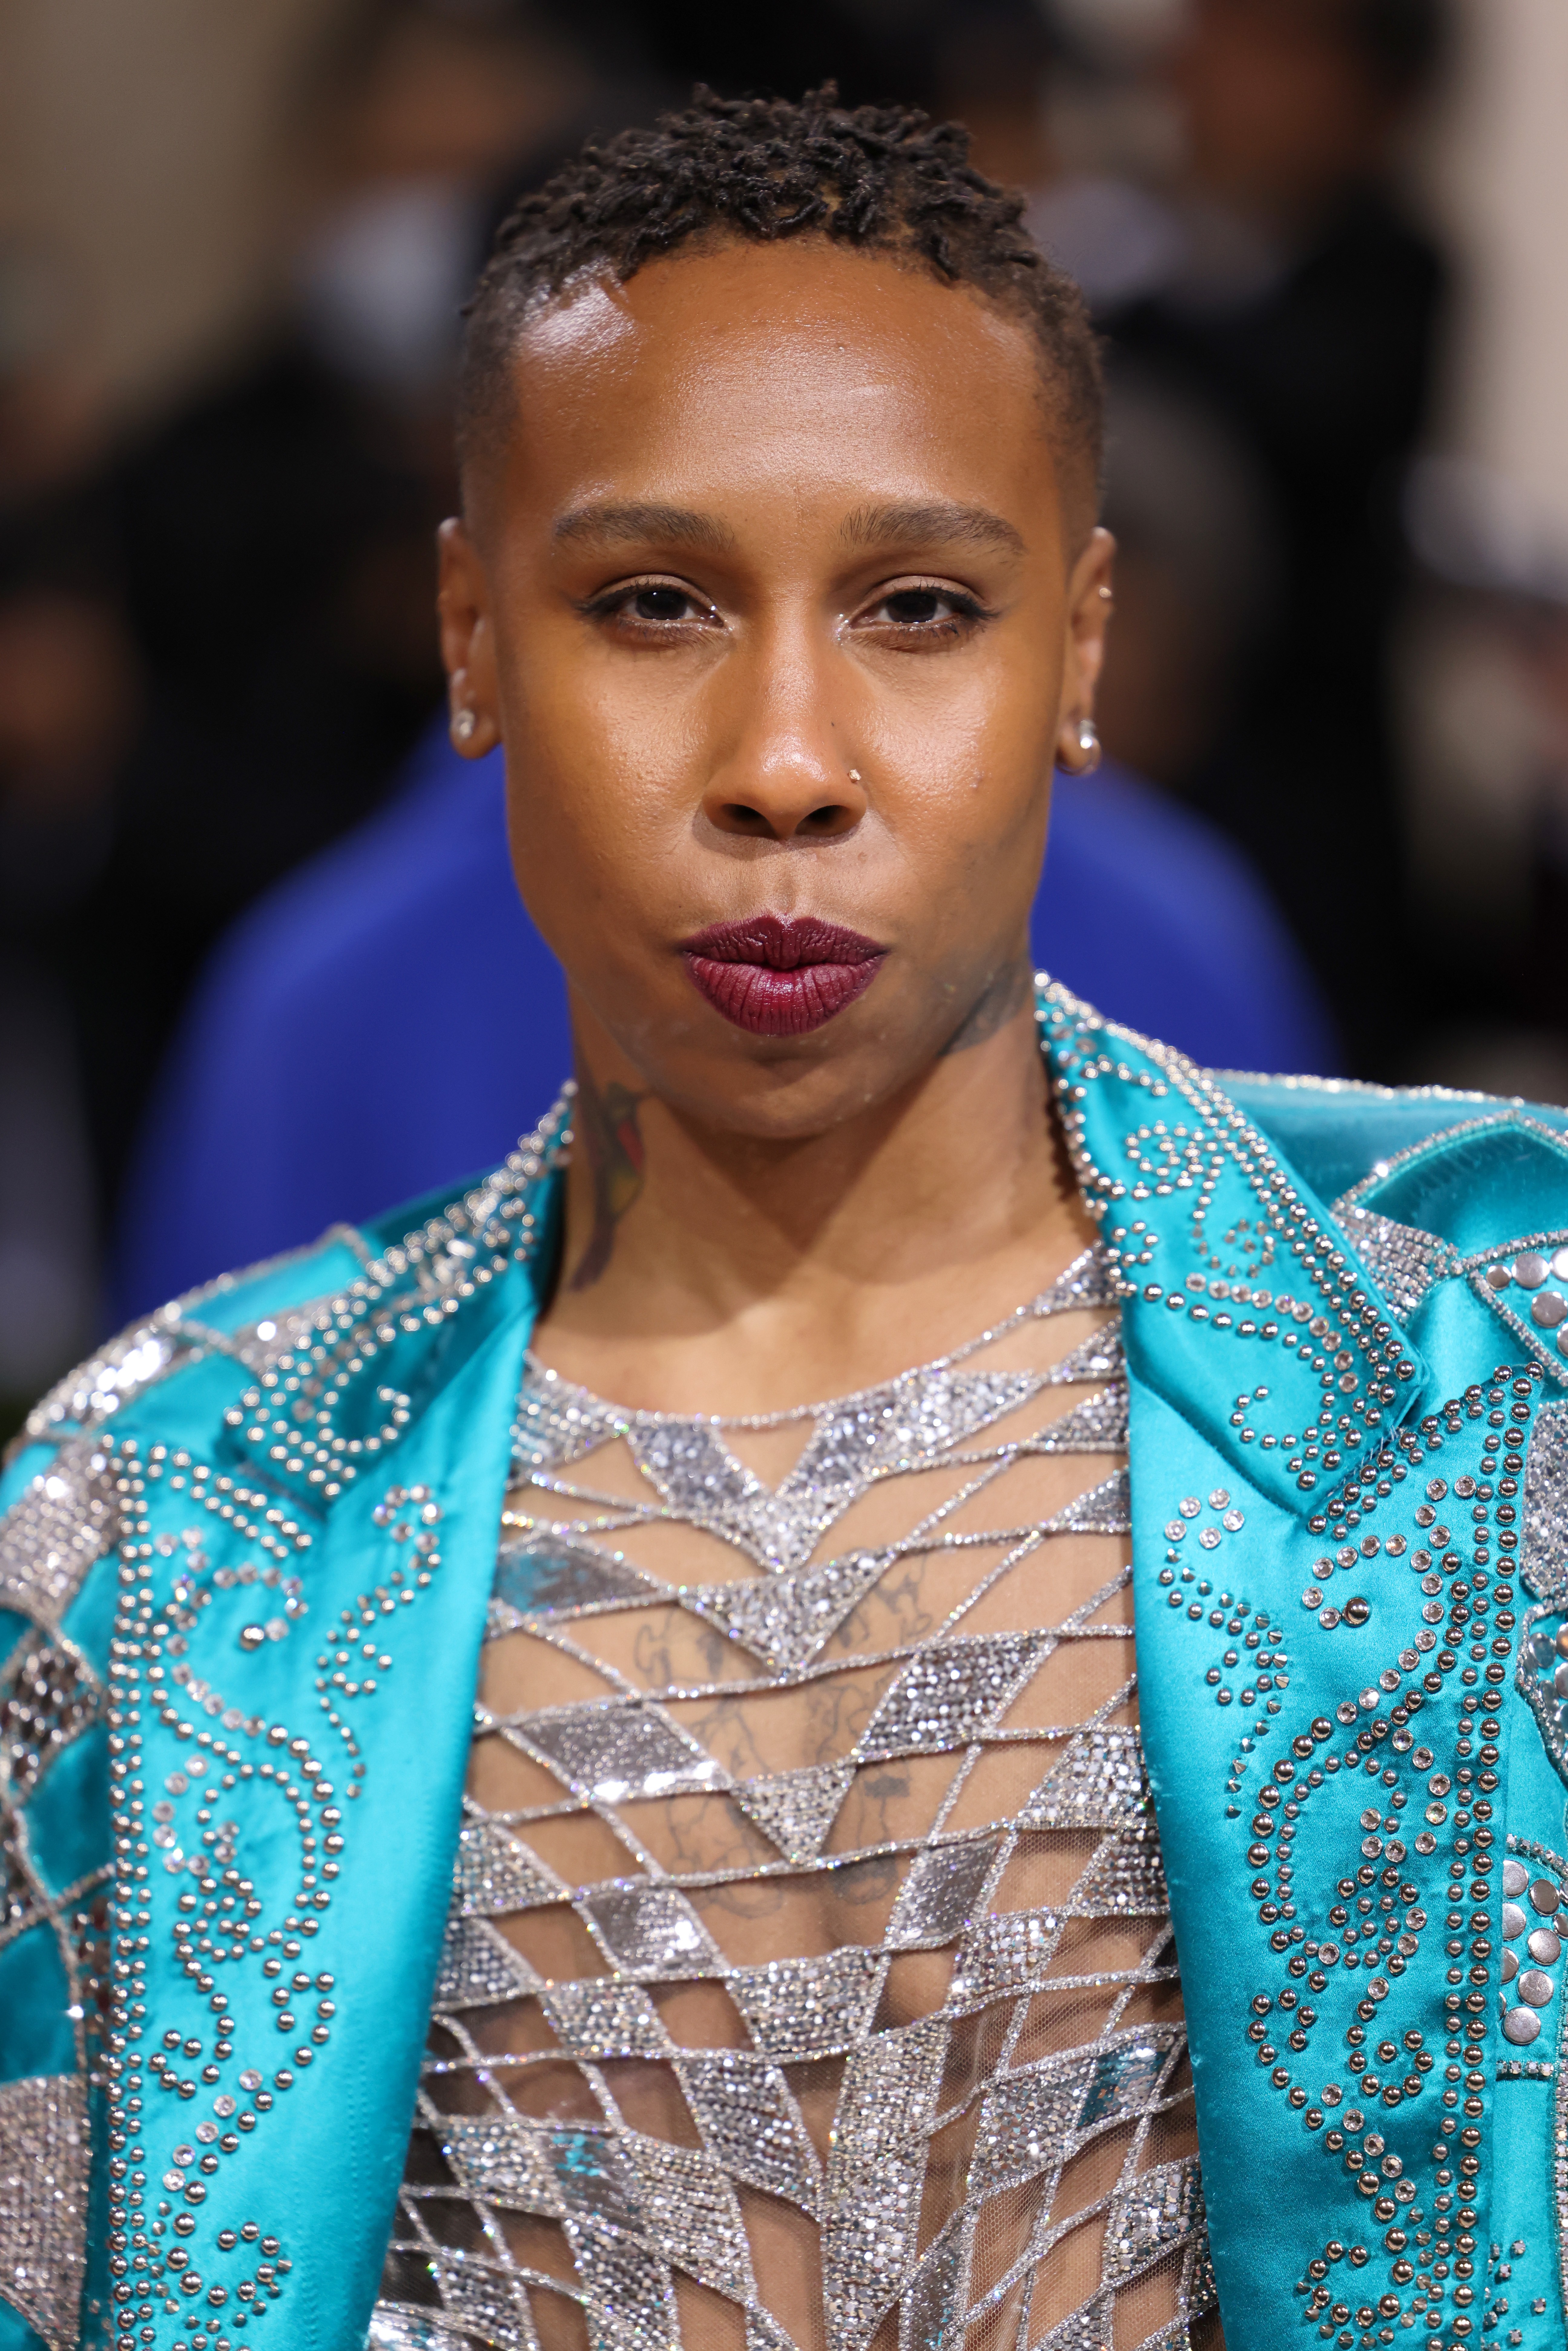 NEW YORK, NEW YORK - MAY 02: Lena Waithe attends The 2022 Met Gala Celebrating "In America: An Anthology of Fashion" at The Metropolitan Museum of Art on May 02, 2022 in New York City. (Photo by John Shearer/Getty Images) (Foto: Getty Images)